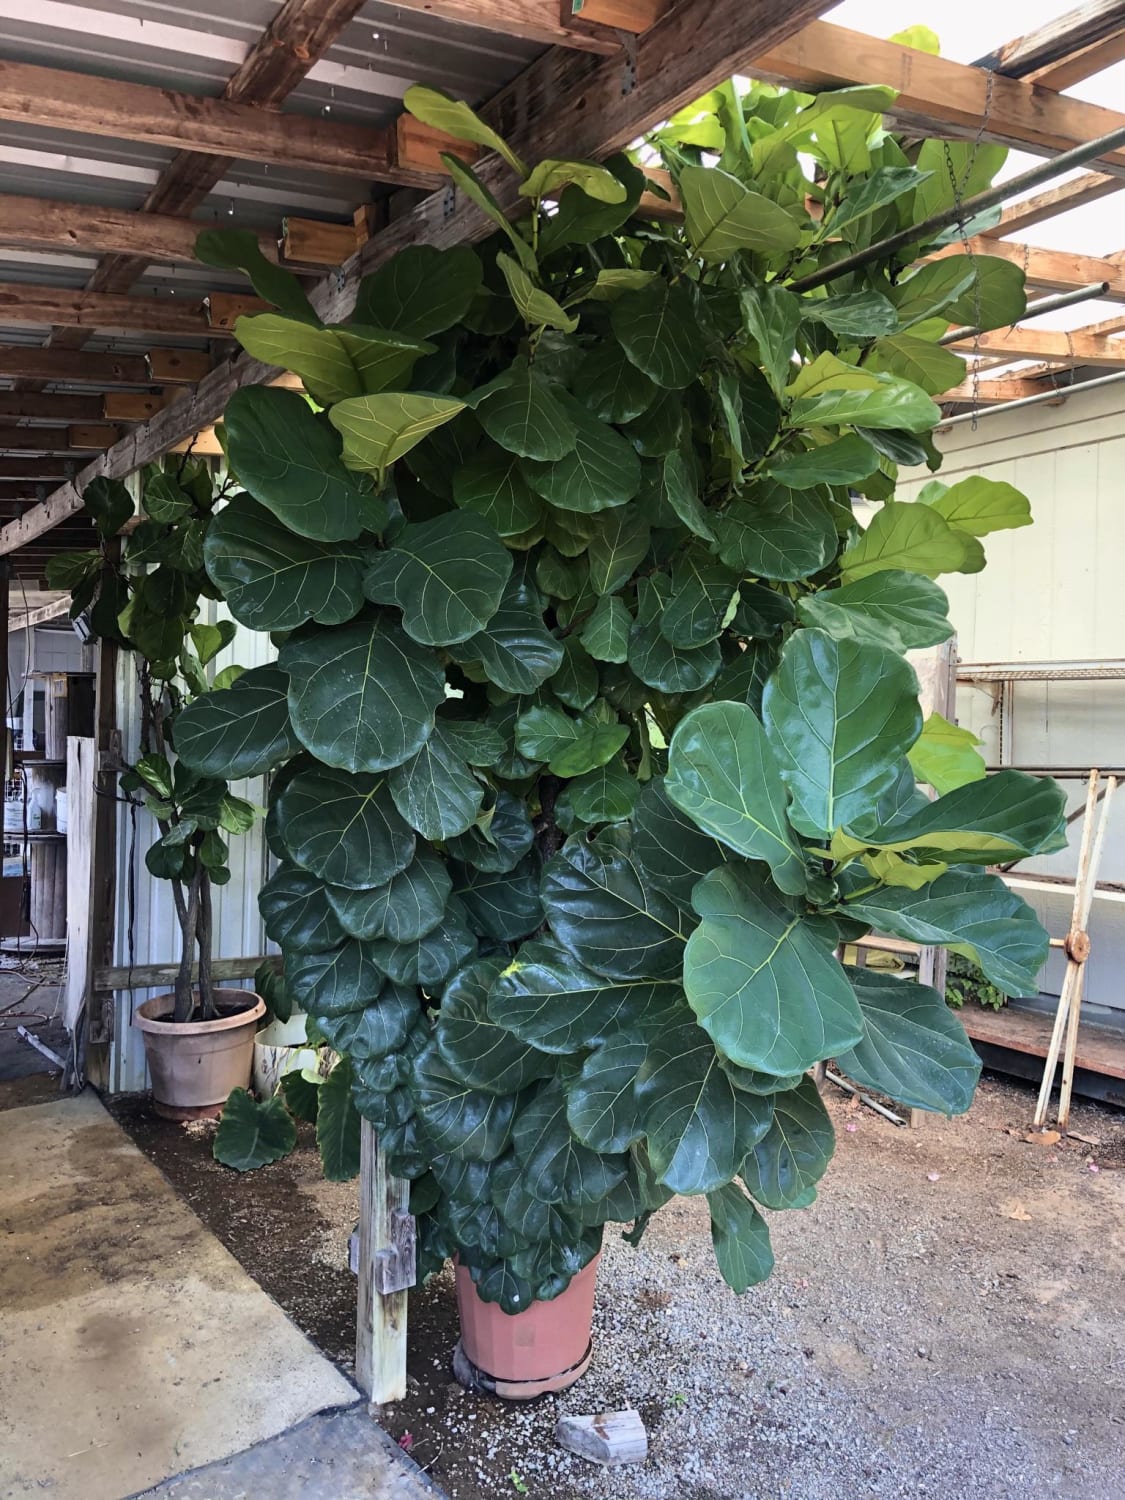 Stumbled on a monster fiddle leaf at an antique store